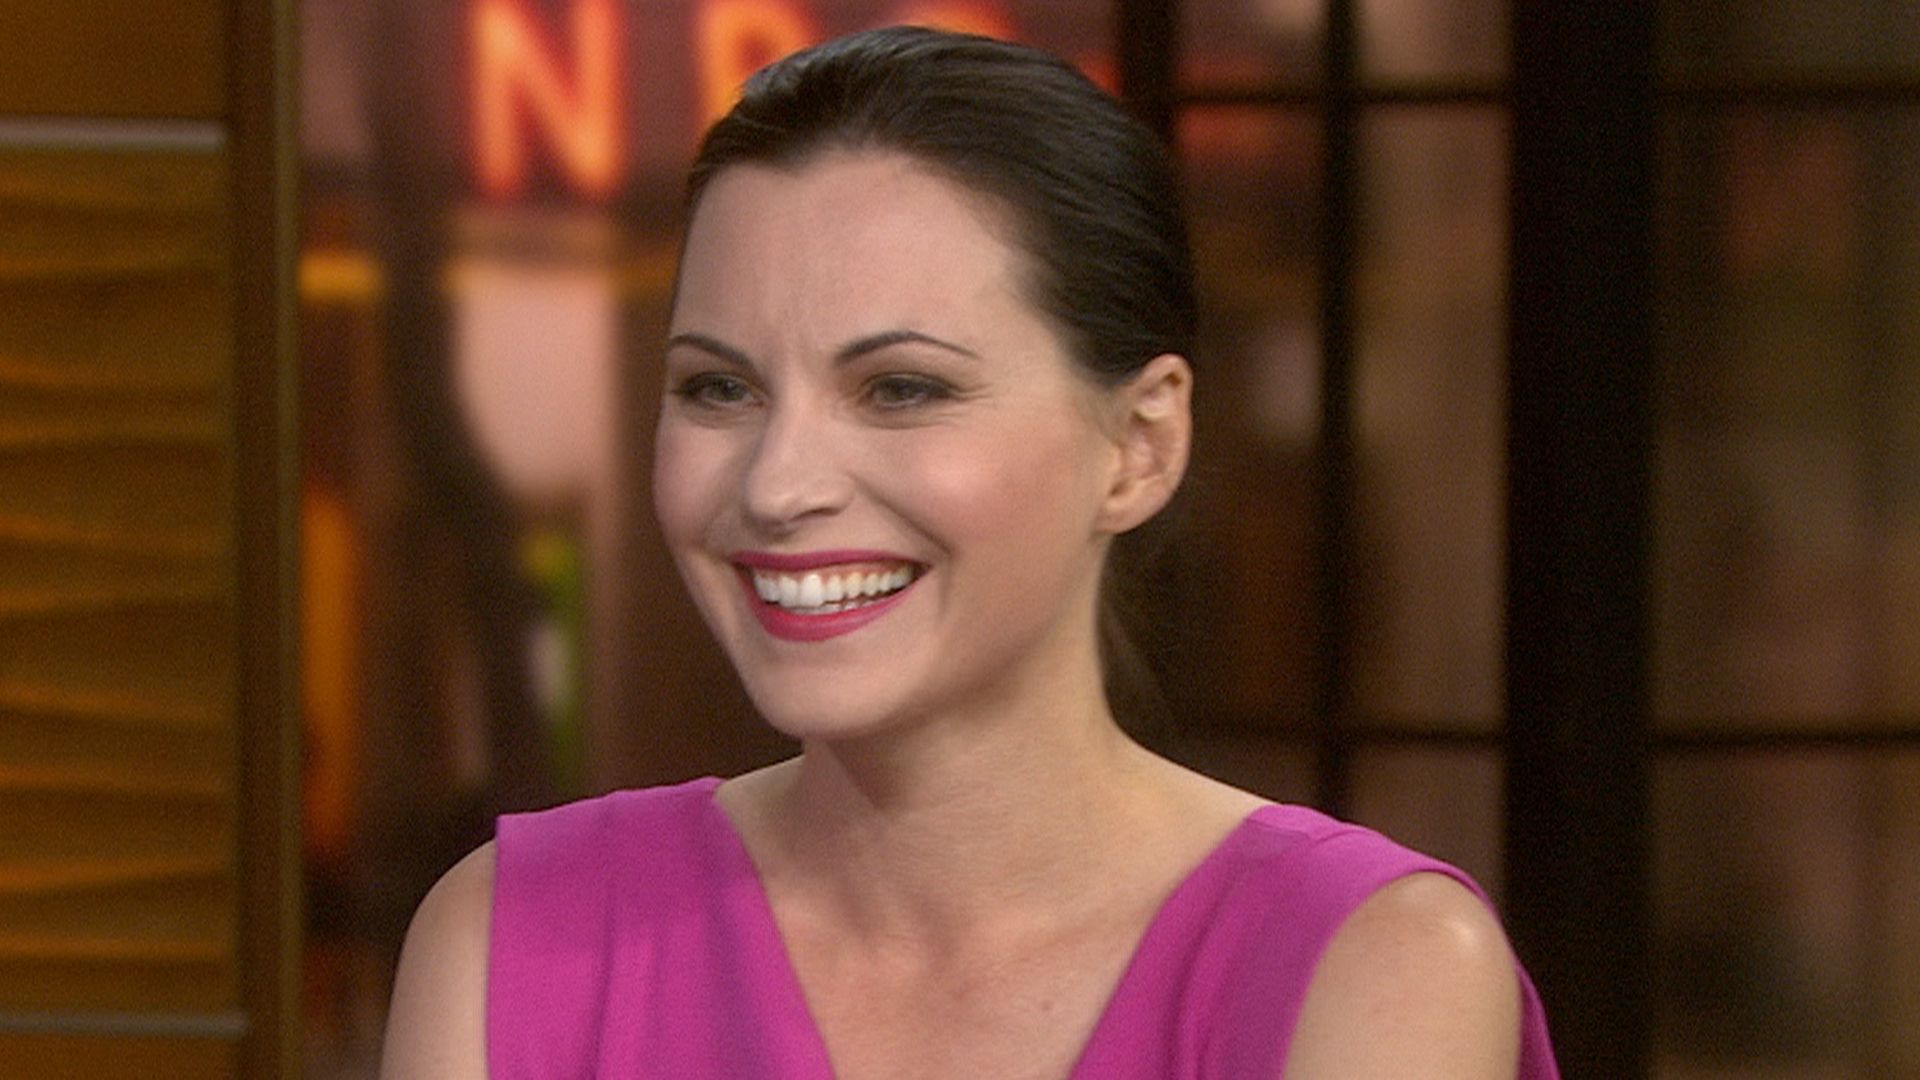 Jill Flint teams up with Michelle Obama on 'Night Shift' .